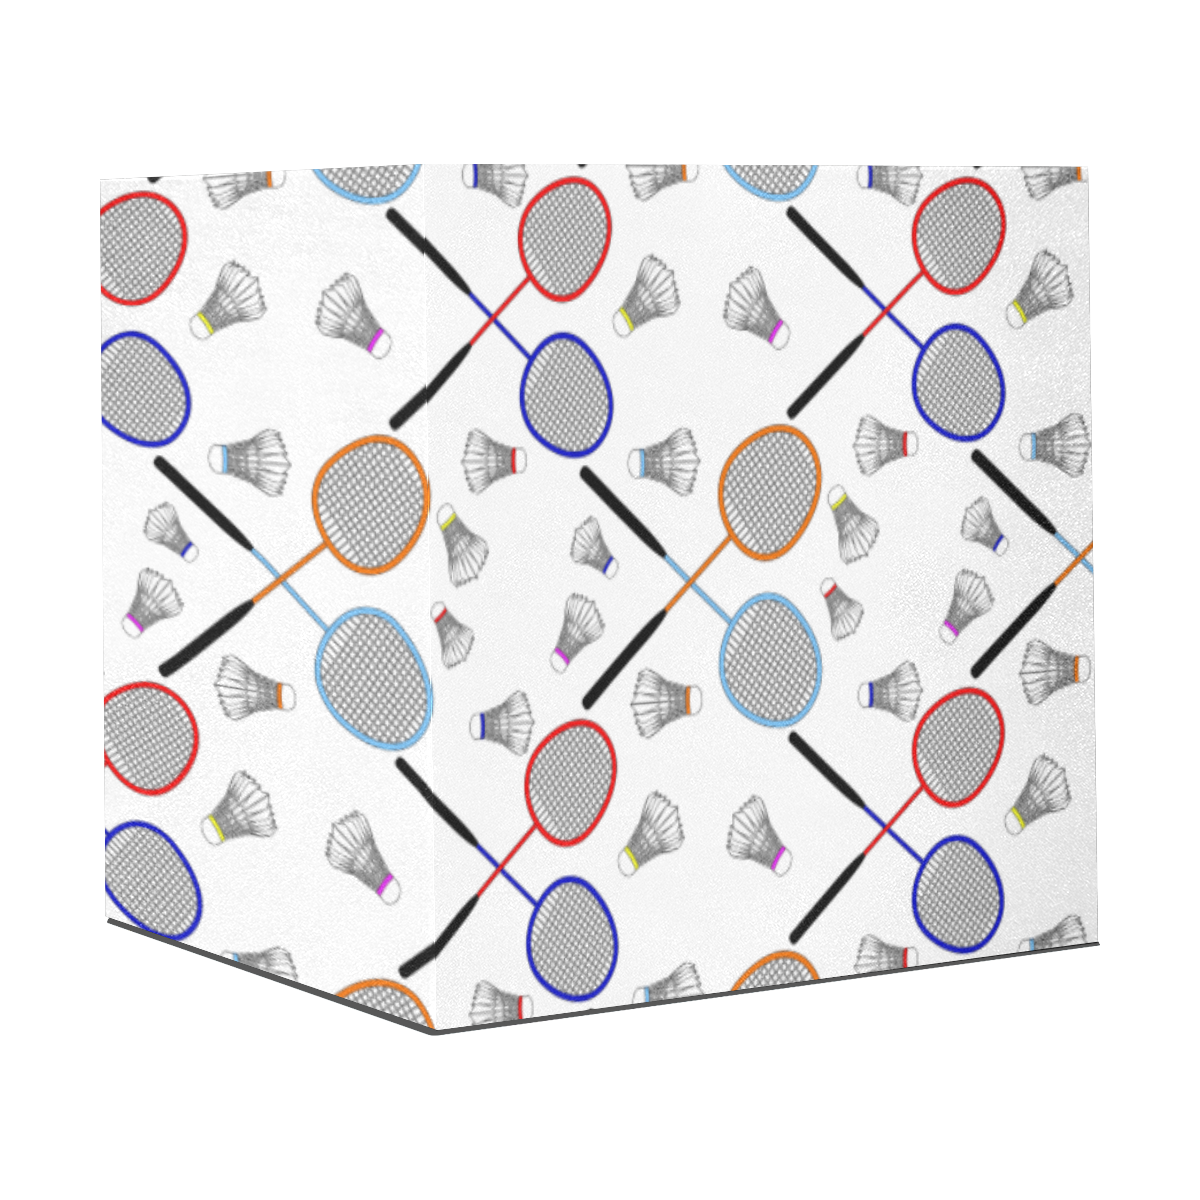 Badminton Rackets and Shuttlecocks Pattern Sports Gift Wrapping Paper 58"x 23" (1 Roll)